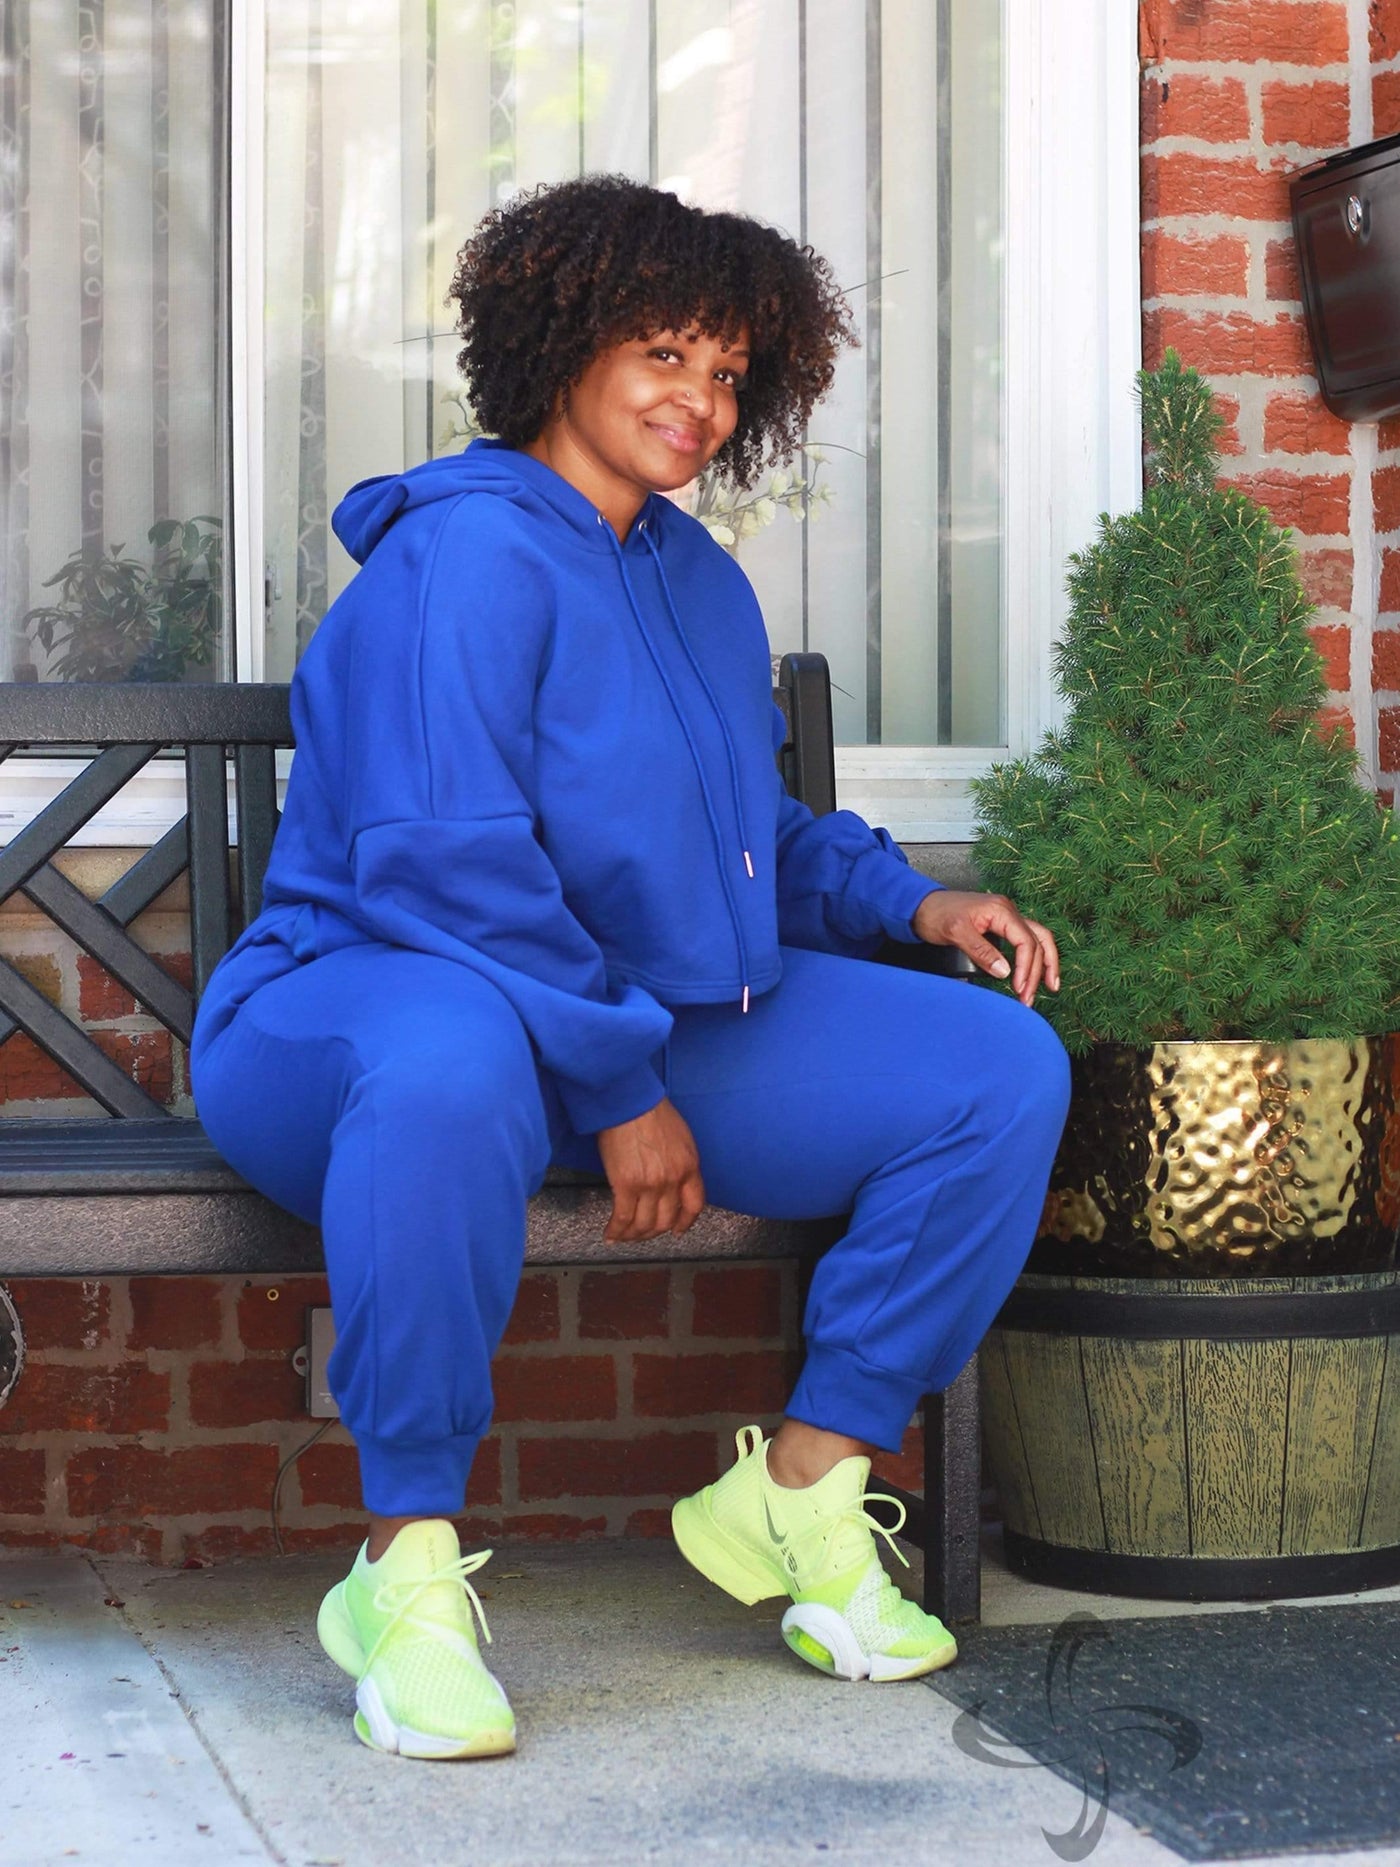 Sweats Up | PLUS Crop Hoodie Jogger Set - Statement Piece NY _tab_plus-size-size-chart, Activewear, Activewear & Loungewear, Blue, Brooklyn Boutique, comfy, crop, Fall, Fall Fashion, jogger set, Lounge, not clearance, Plus Size, Plus Size Activewear, Plus Size Fall, plus size joggers, Plus Size Sets, Plus Sizes, royal blue, Sets, Ships from USA, Statement Clothing, statement piece, Statement Piece Boutique, statement piece ny, Statement Pieces, Statement Pieces Boutique, Women's Boutique, XL Statement Plus